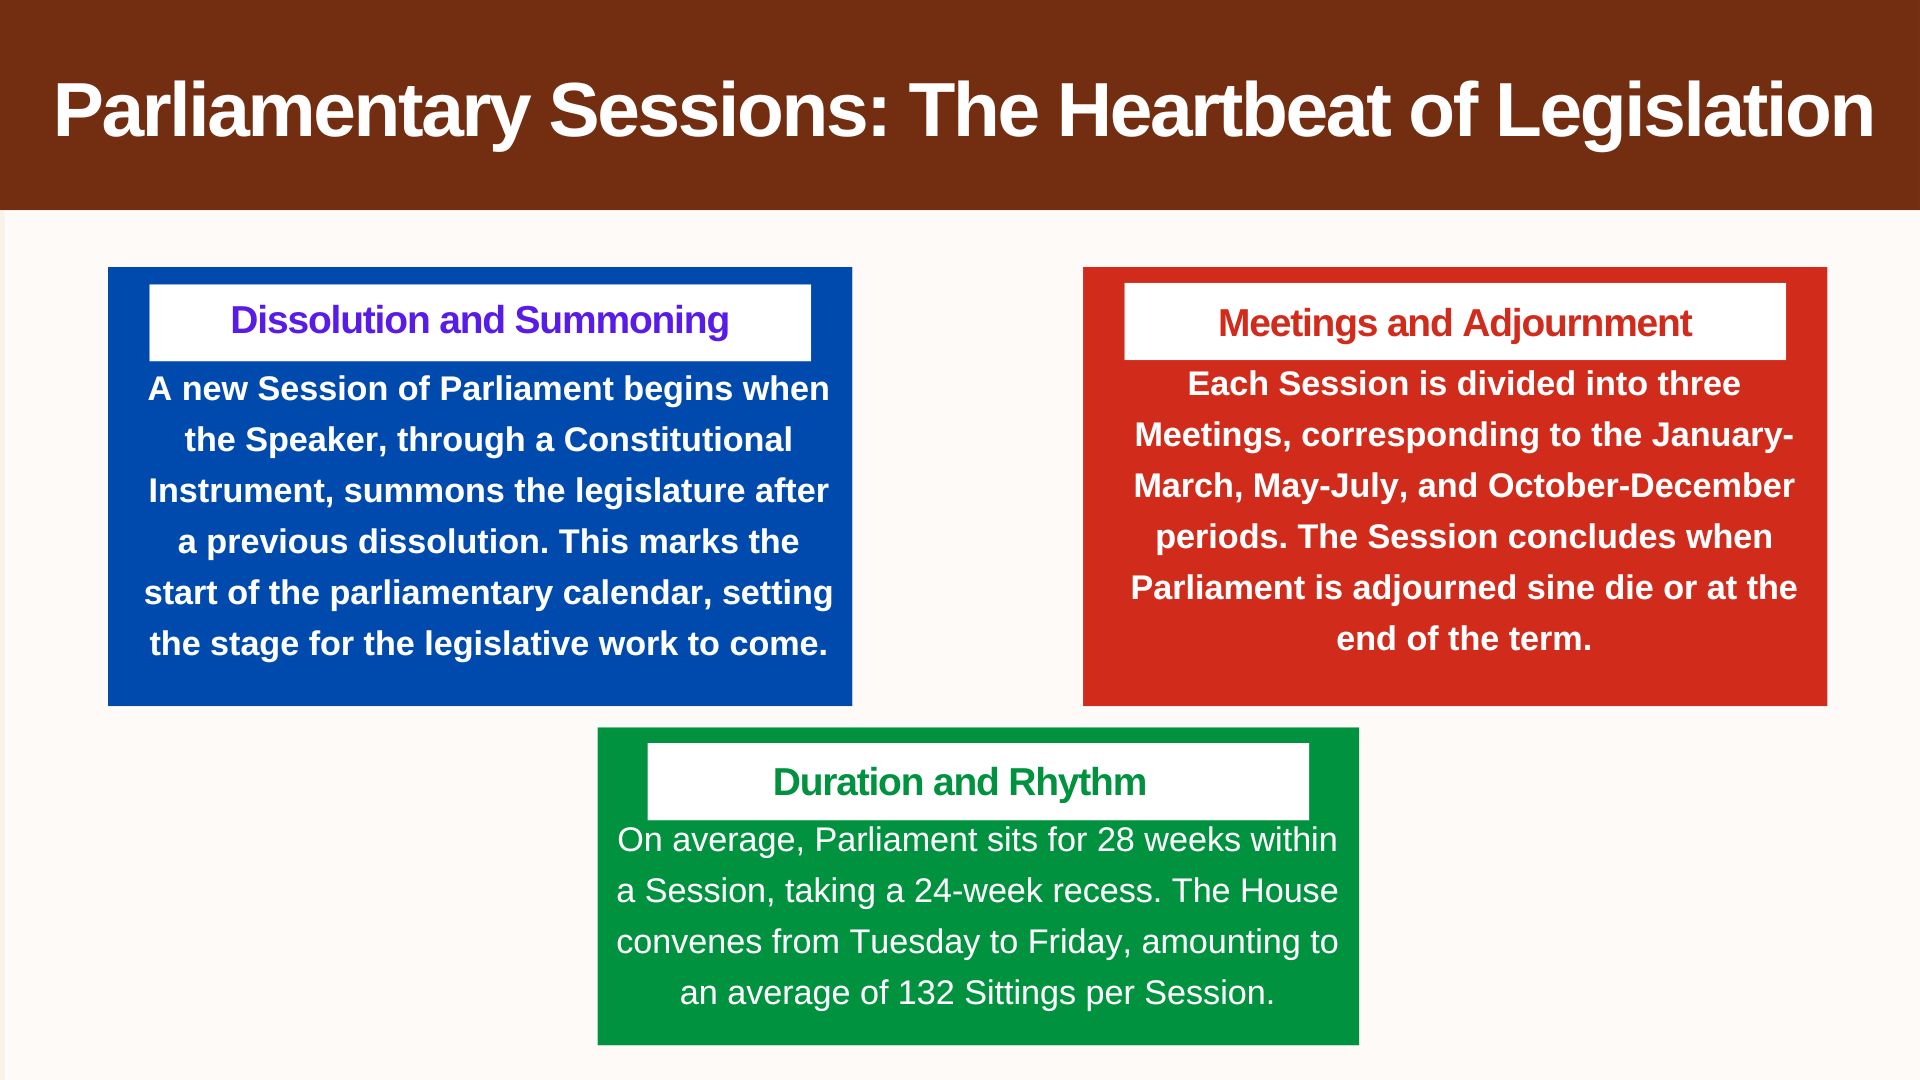 Parliamentary Sessions: The Heartbeat of Legislation